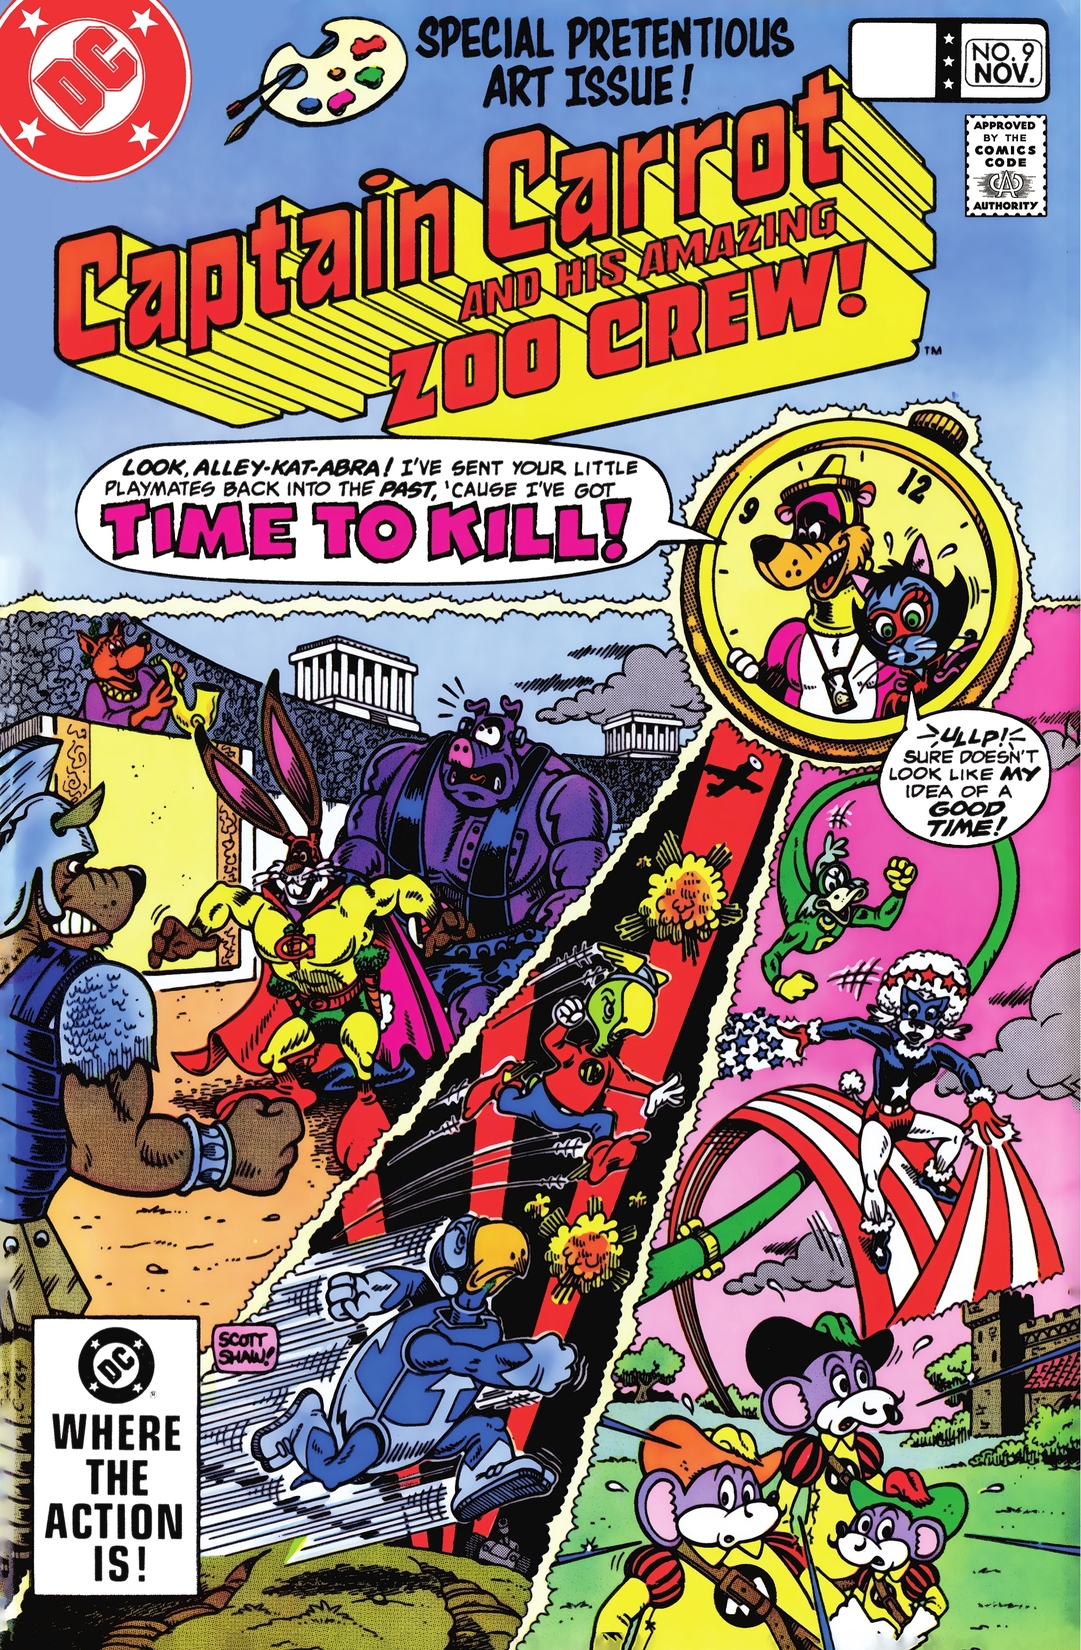 Captain Carrot and His Amazing Zoo Crew #9 preview images